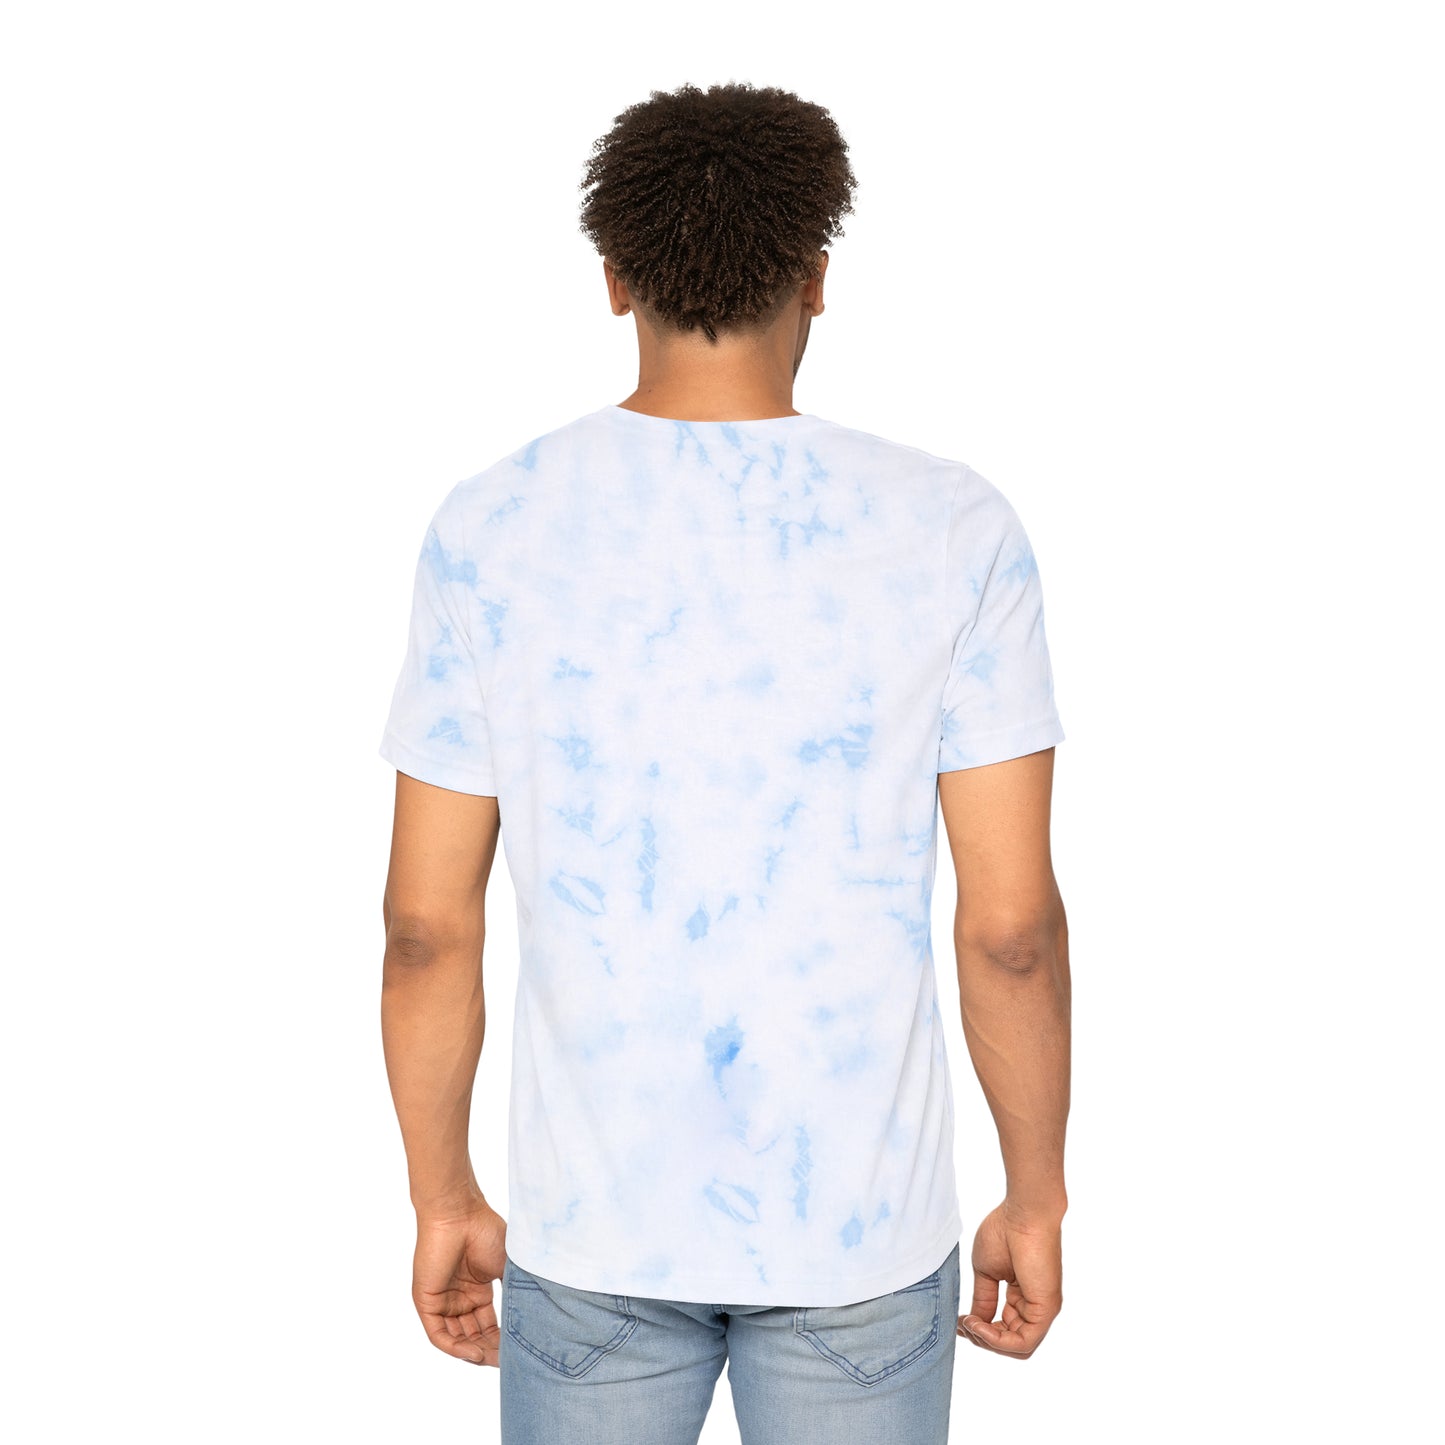 Chill I Got This Tie-Dyed T-Shirt